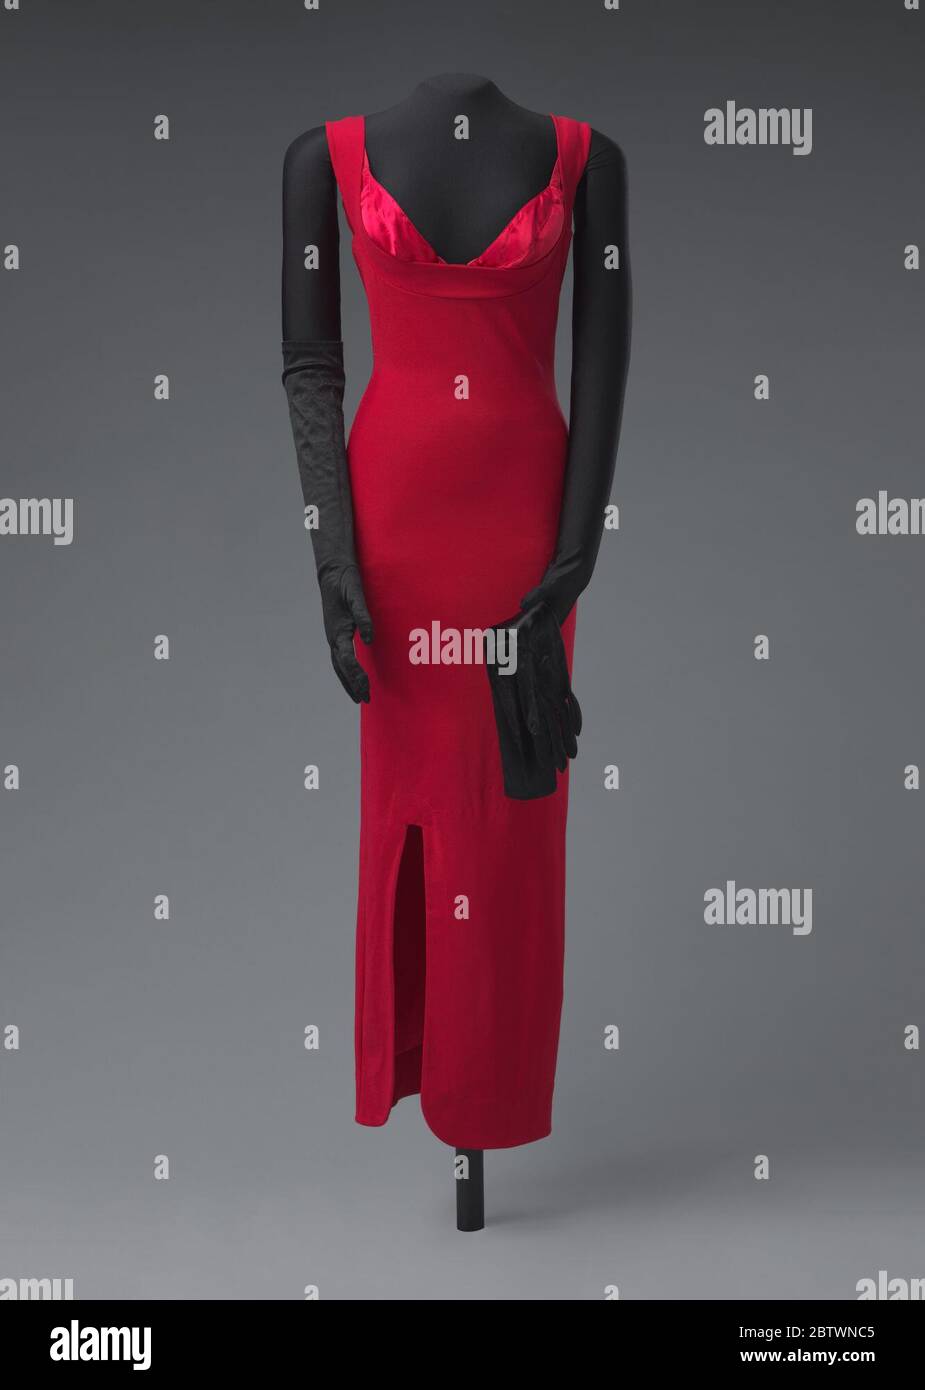 Costume worn by Terry Ellis in Giving Him Something He Can Feel video. A costume worn by Terry Ellis of En Vogue for the music video 'Giving Him Something He Can Feel' (1992) comprised of a red dress (.1), a bra (.2), a pair of elbow-length black gloves (.3), and a pair of black stiletto heels (.4ab).Dress (.1): A red sleeveless dress with an an ank Stock Photo